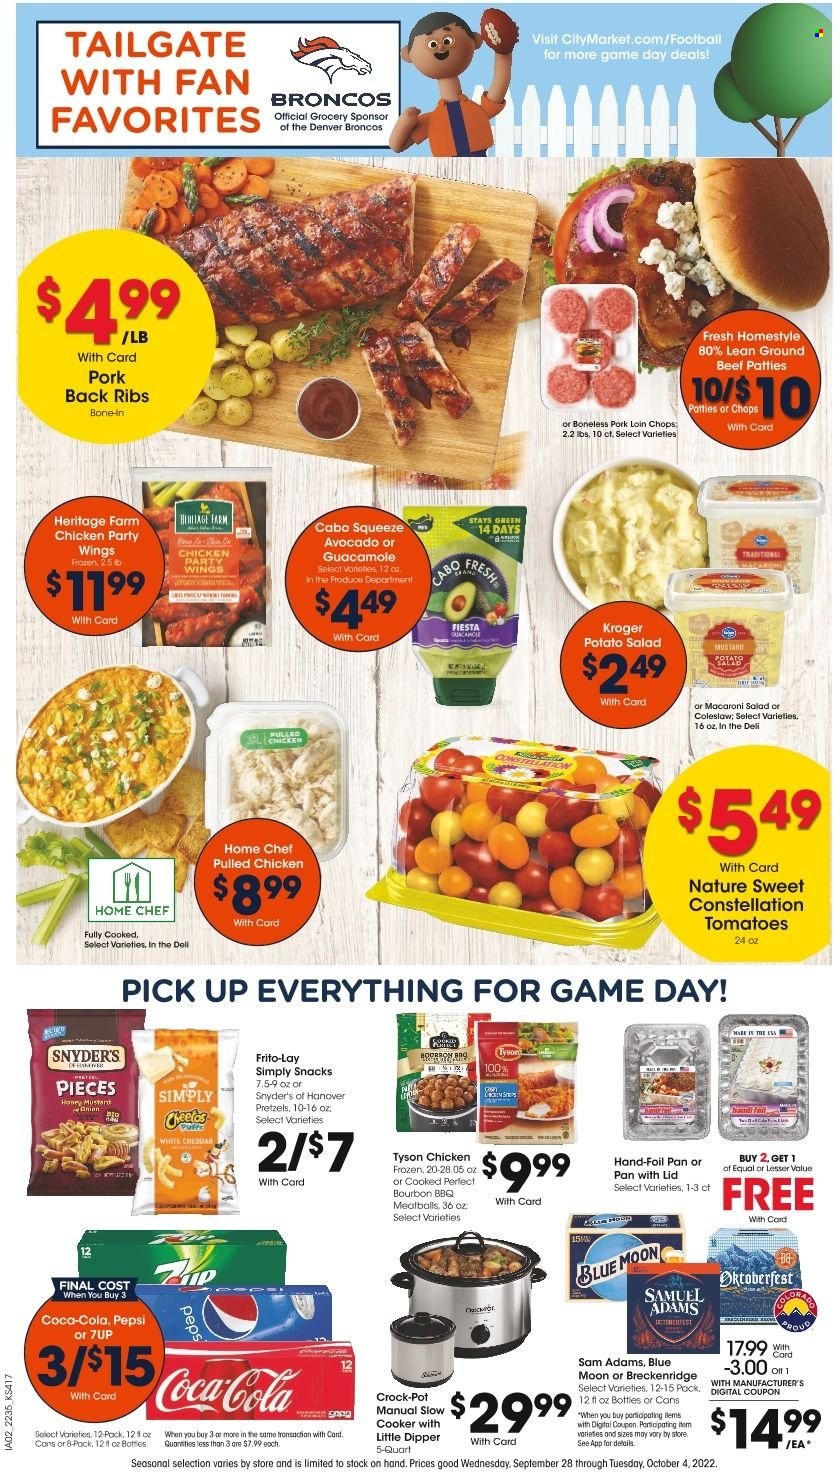 thumbnail - City Market Flyer - 09/28/2022 - 10/04/2022 - Sales products - pretzels, puffs, tomatoes, onion, coleslaw, meatballs, pulled chicken, guacamole, potato salad, macaroni salad, cheddar, cheese, snack, Frito-Lay, mustard, honey mustard, Coca-Cola, Pepsi, 7UP, beer, beef meat, ground beef, pork chops, pork loin, pork meat, pork ribs, pork back ribs, pot, slow cooker, Blue Moon. Page 2.